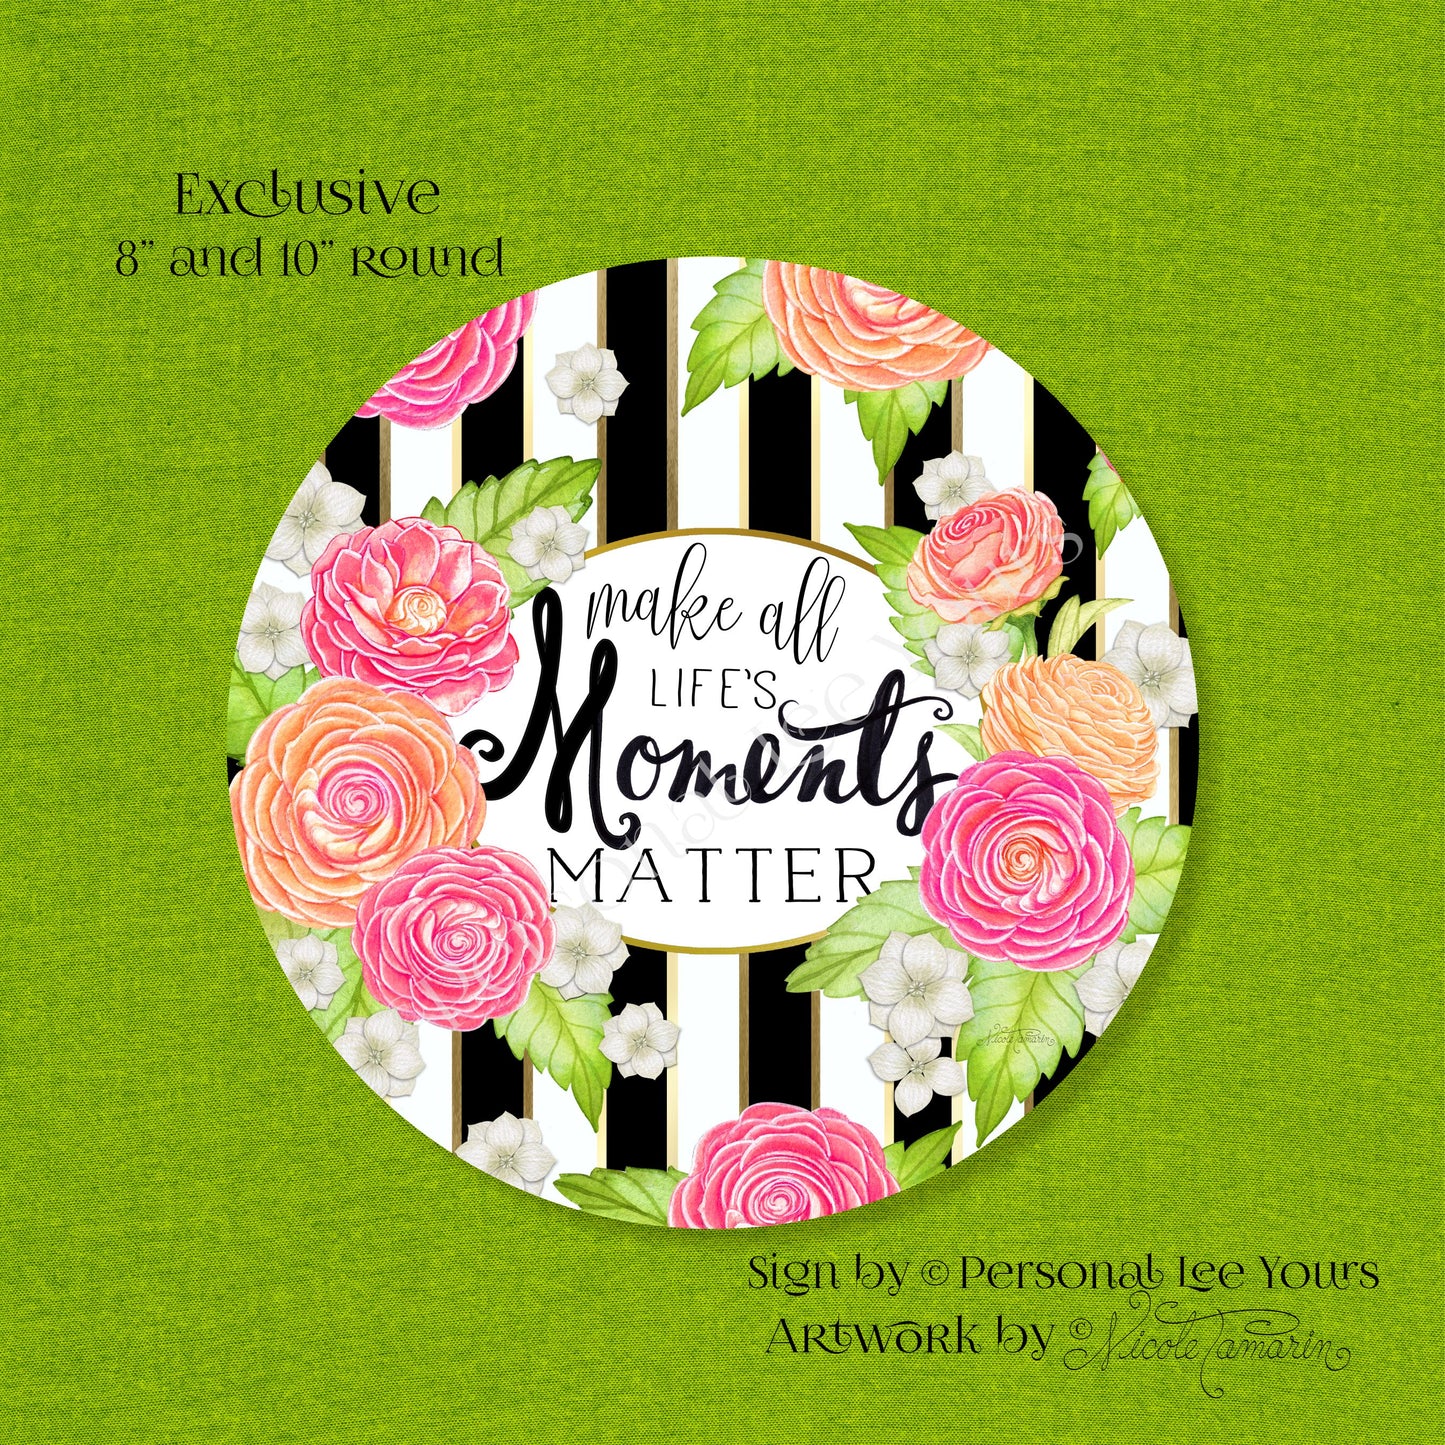 Nicole Tamarin Exclusive Sign * Make All Life's Moments Matter * Round * Lightweight Metal